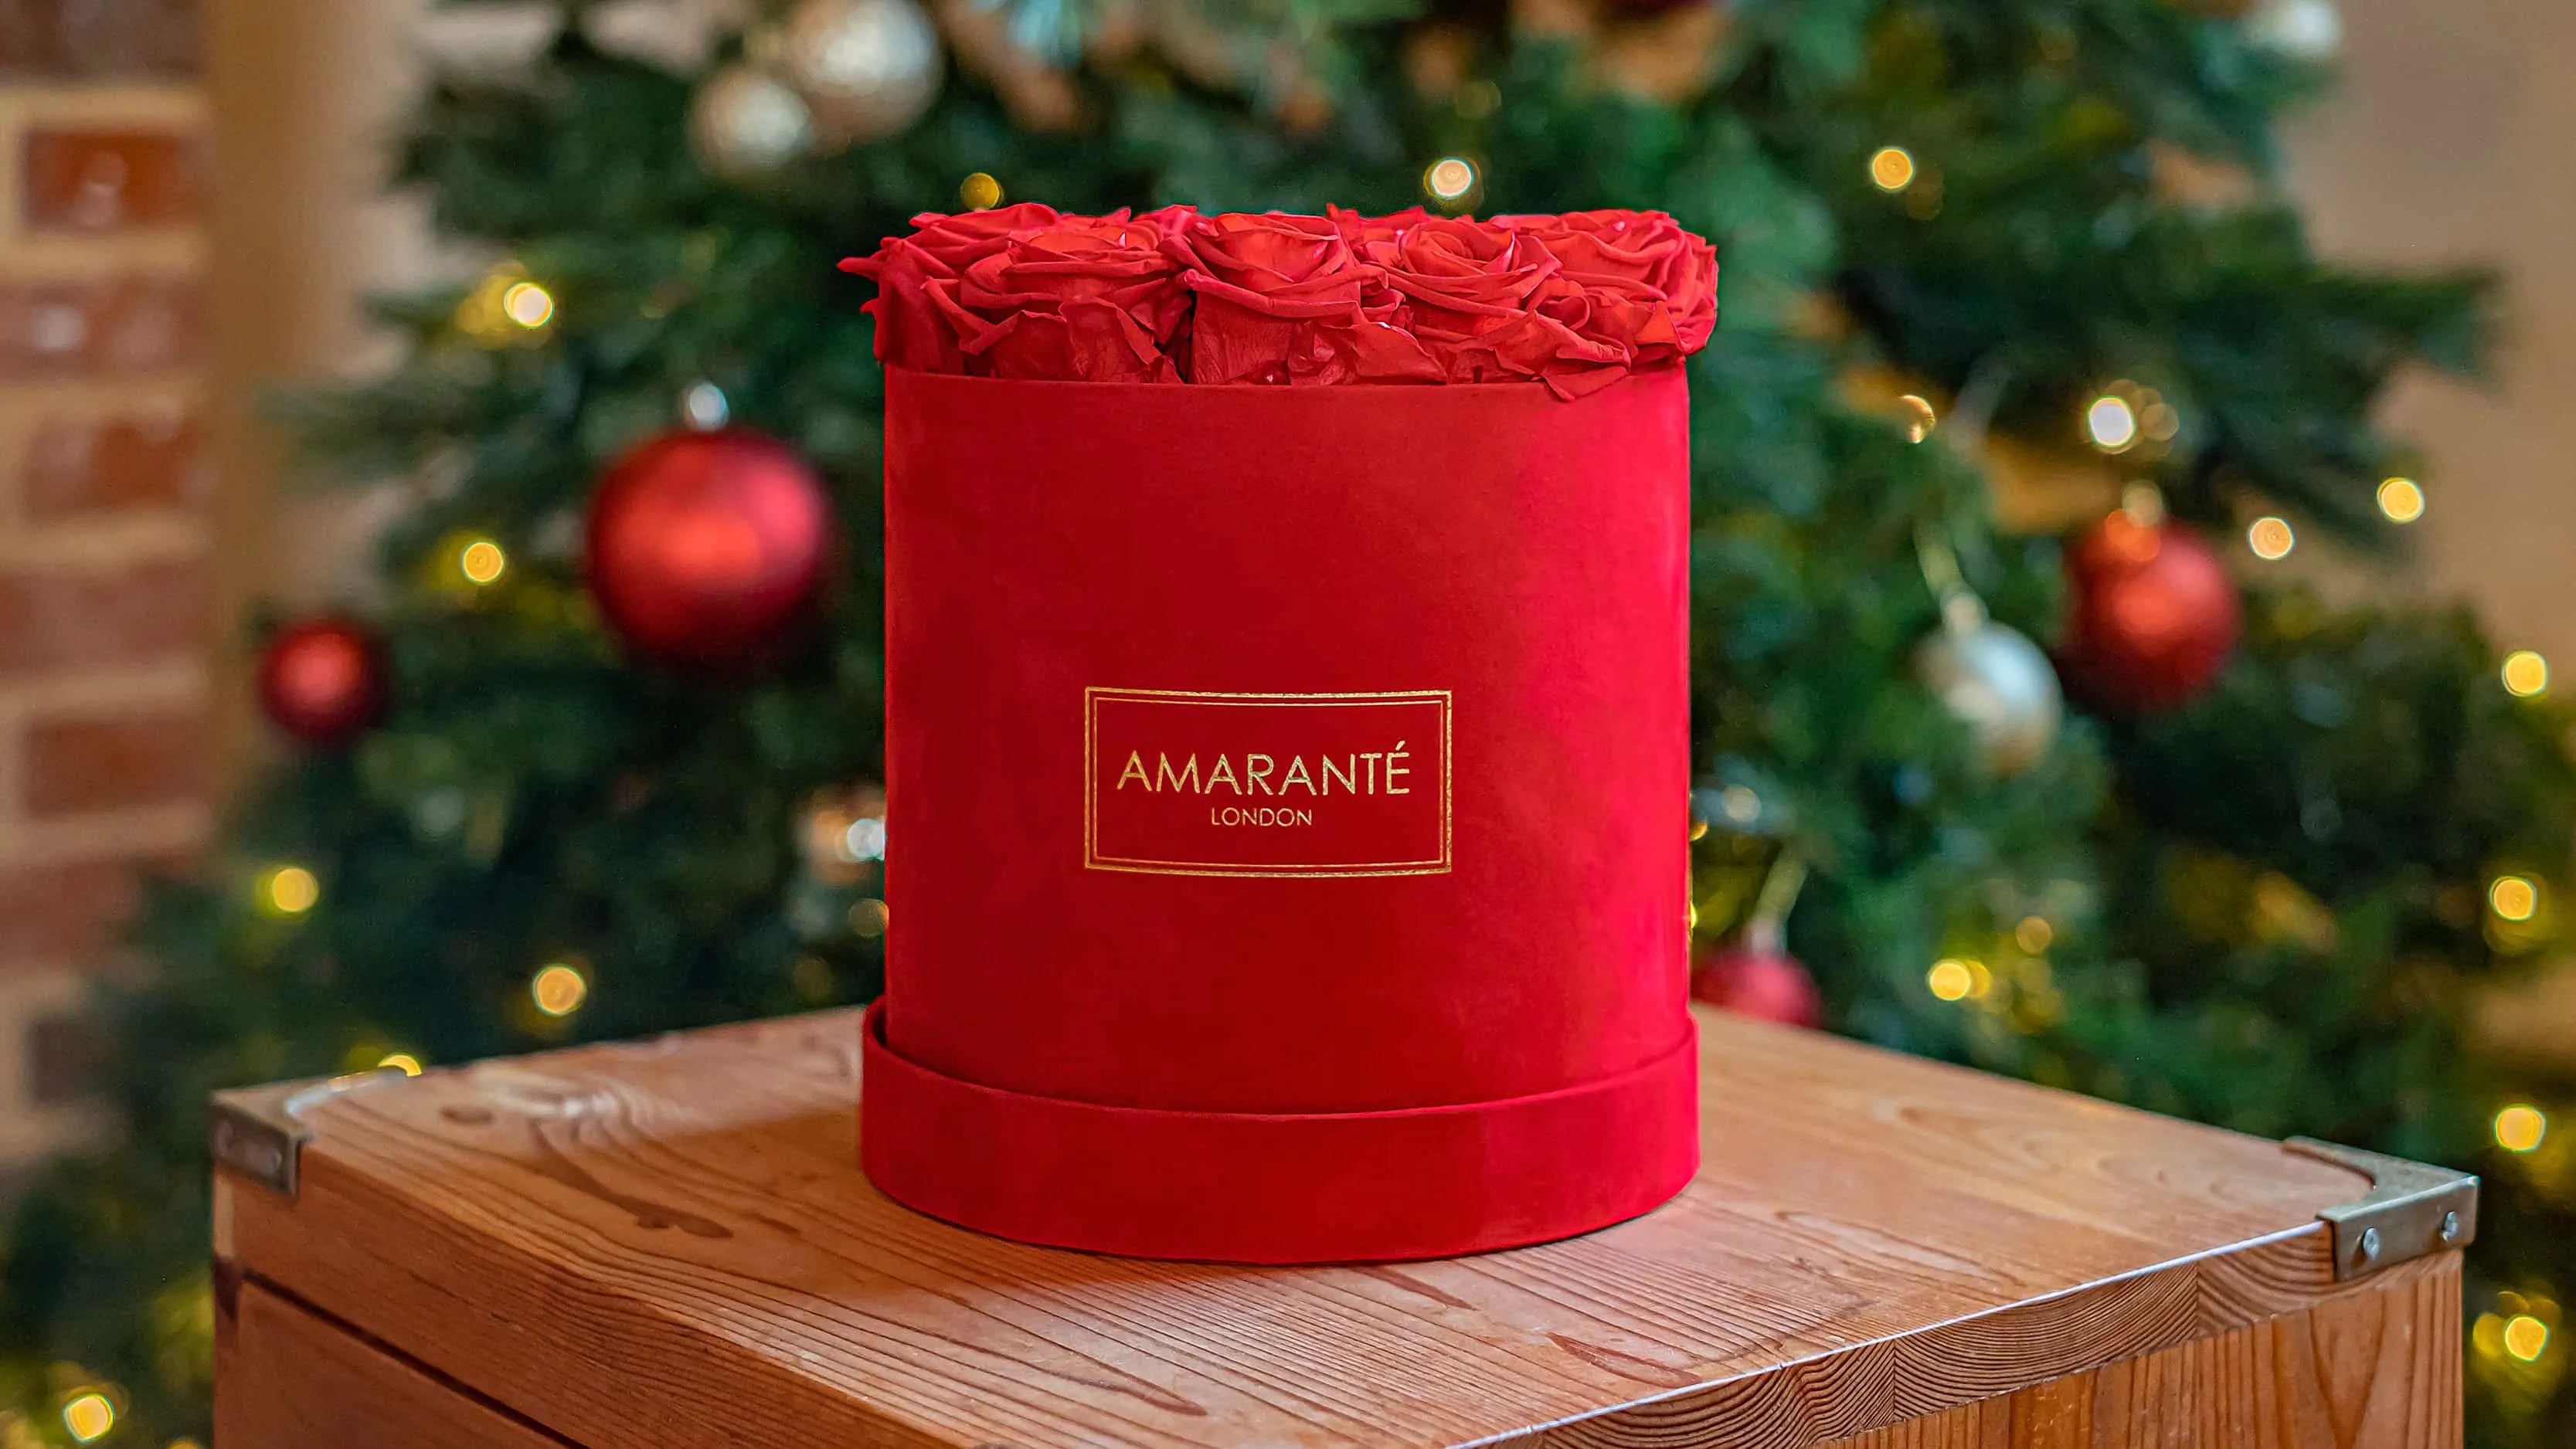 This Black Friday Buy Your Christmas Gifts, Choose Amaranté Infinity Roses